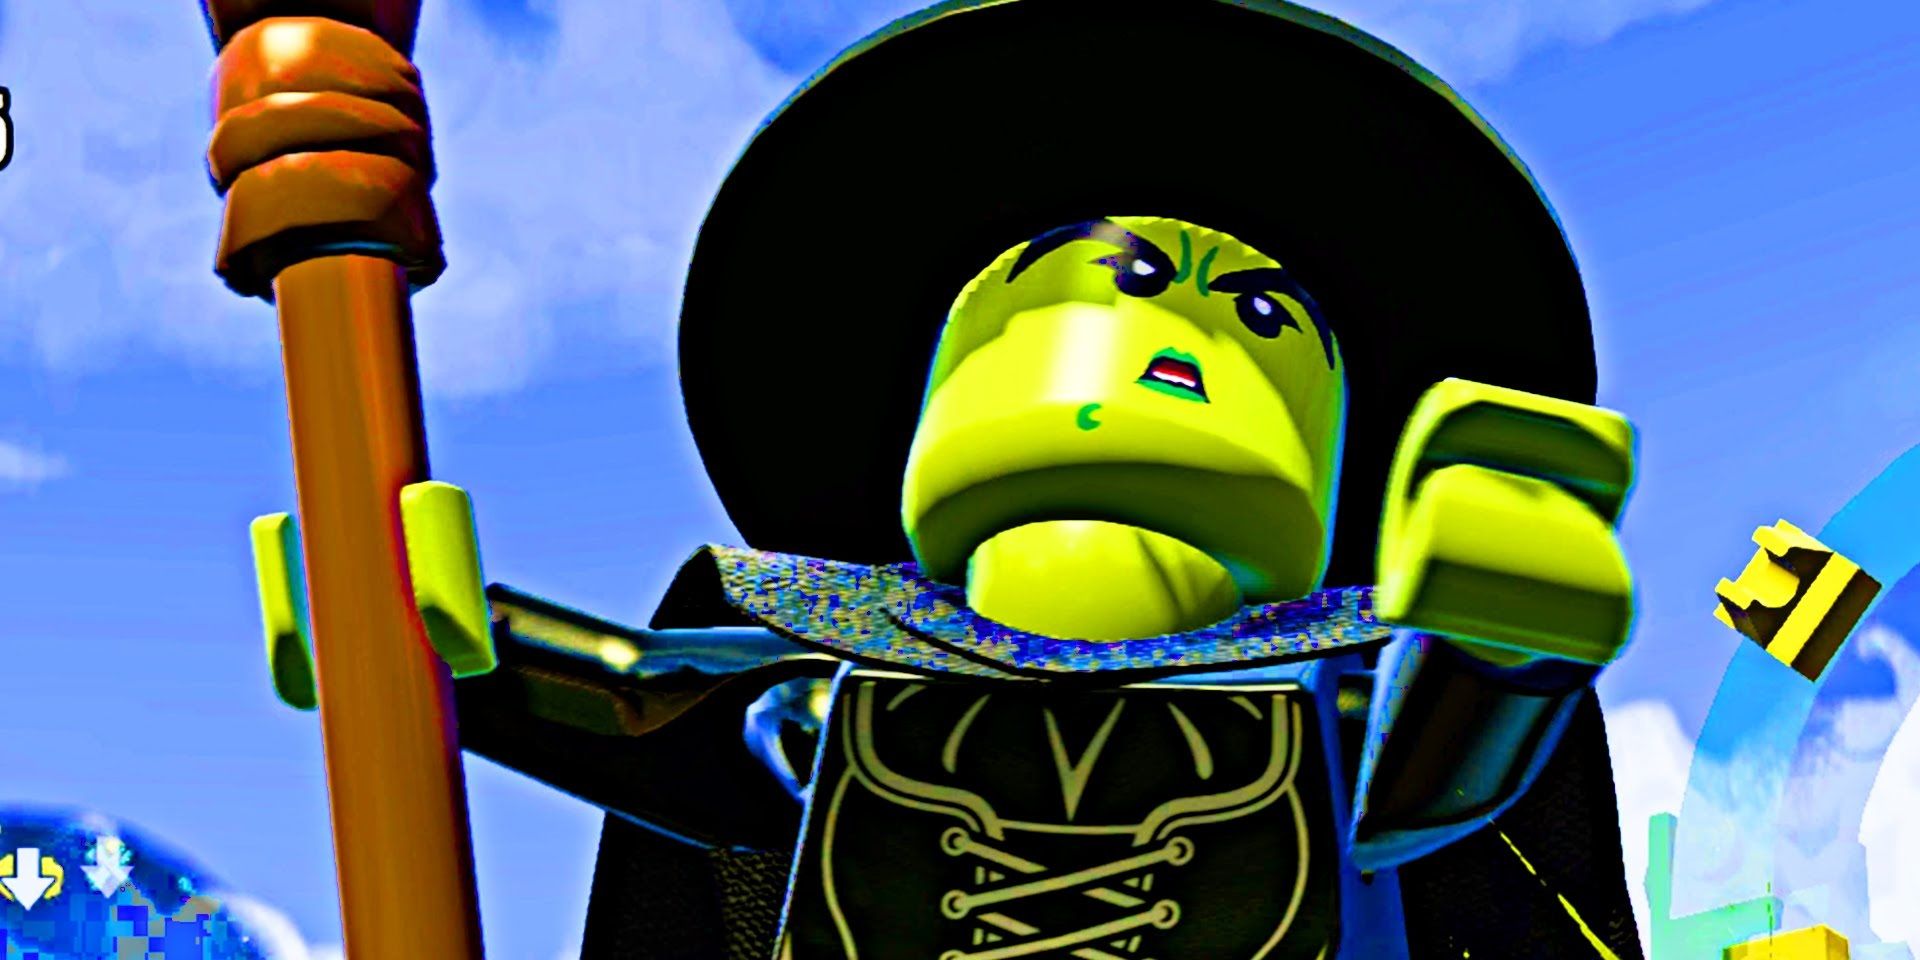 The Wicked Witch of the West from Lego Dimensions